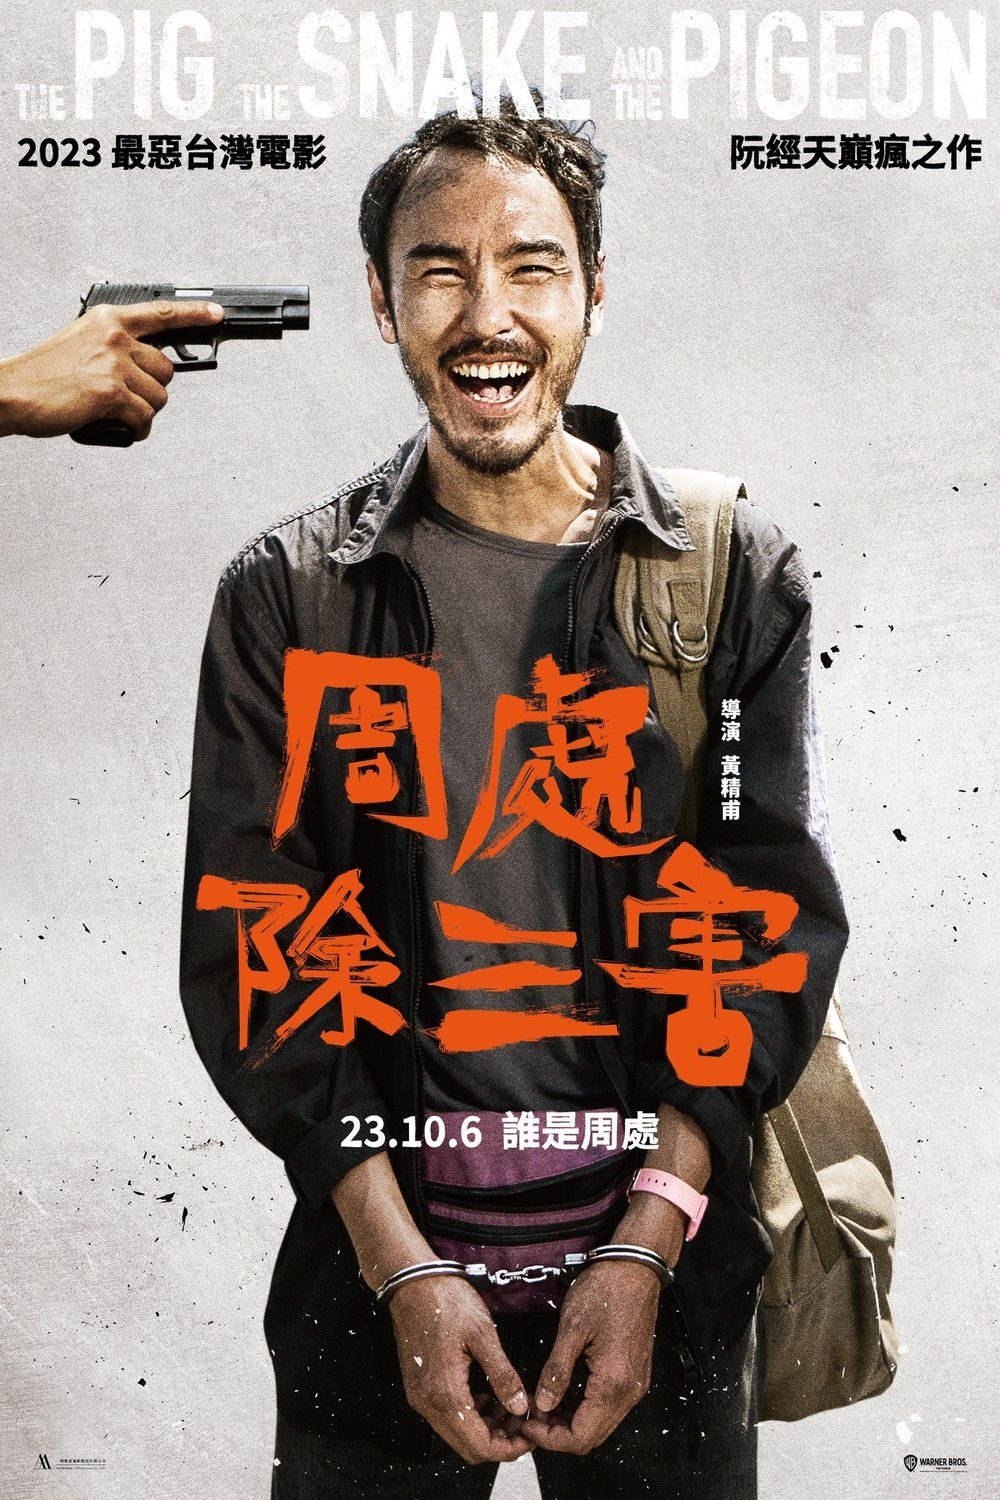 Mandarin poster of the movie The Pig, the Snake and the Pigeon